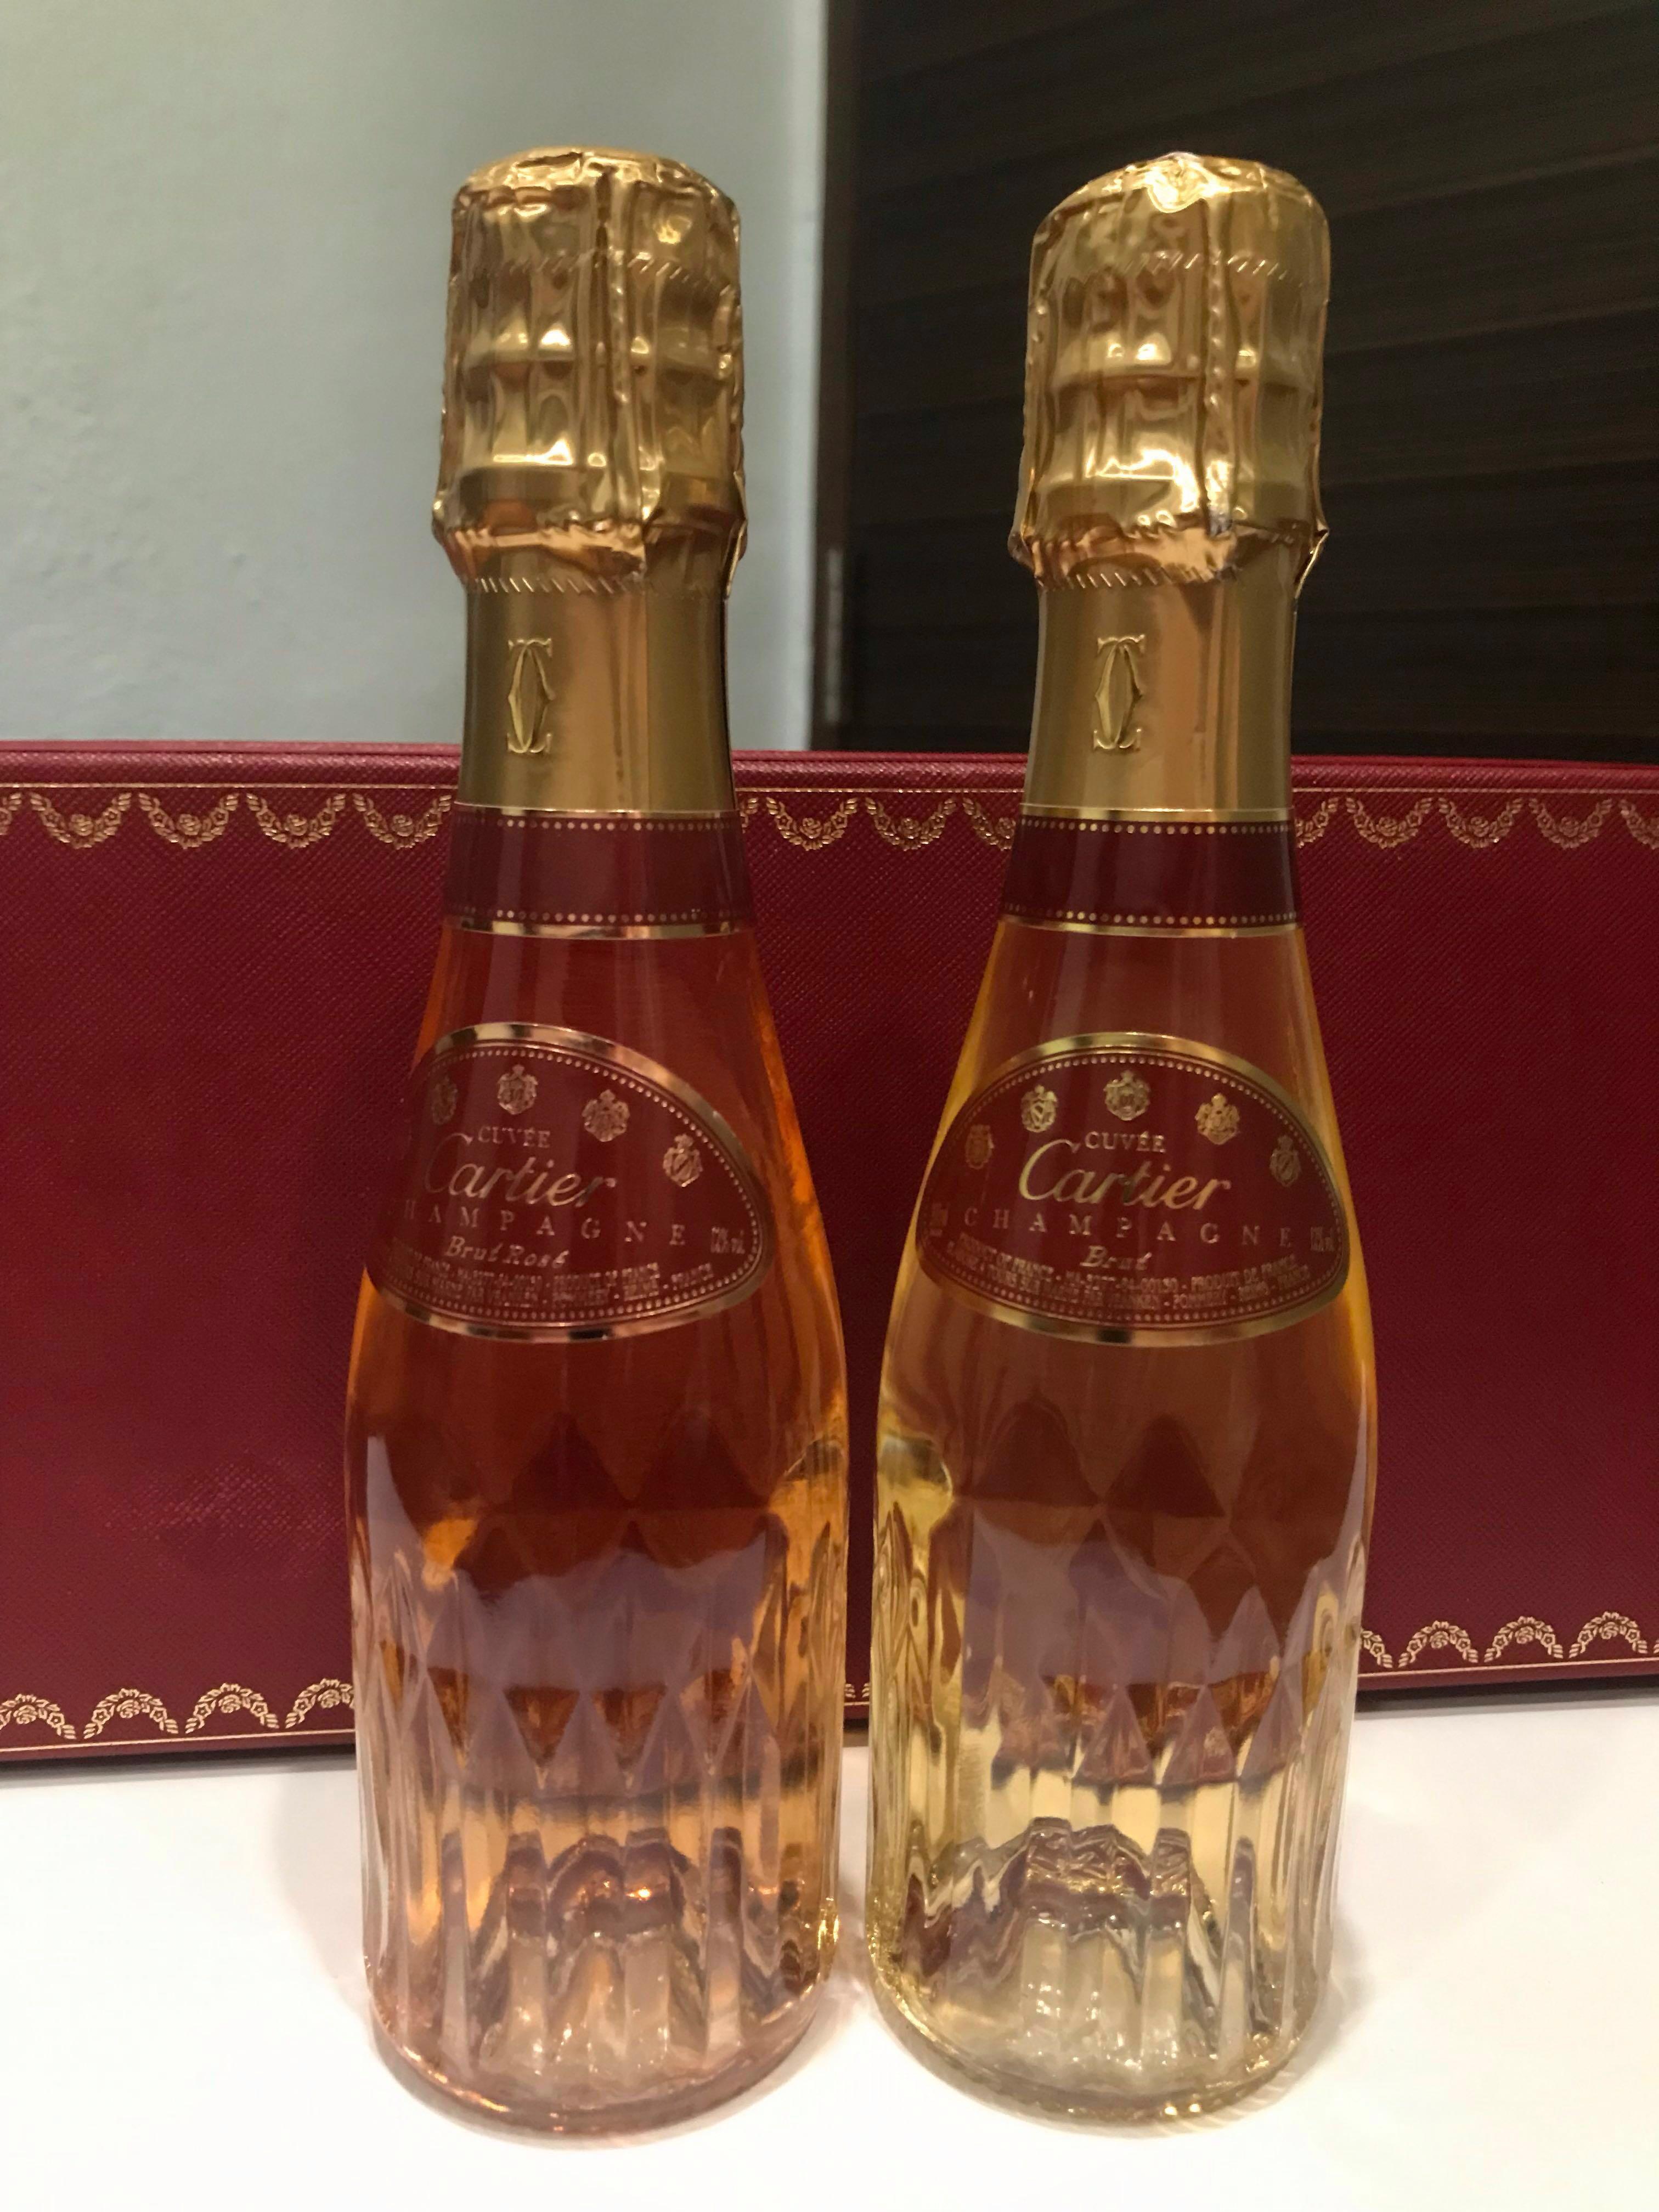 cartier champagne brut cost